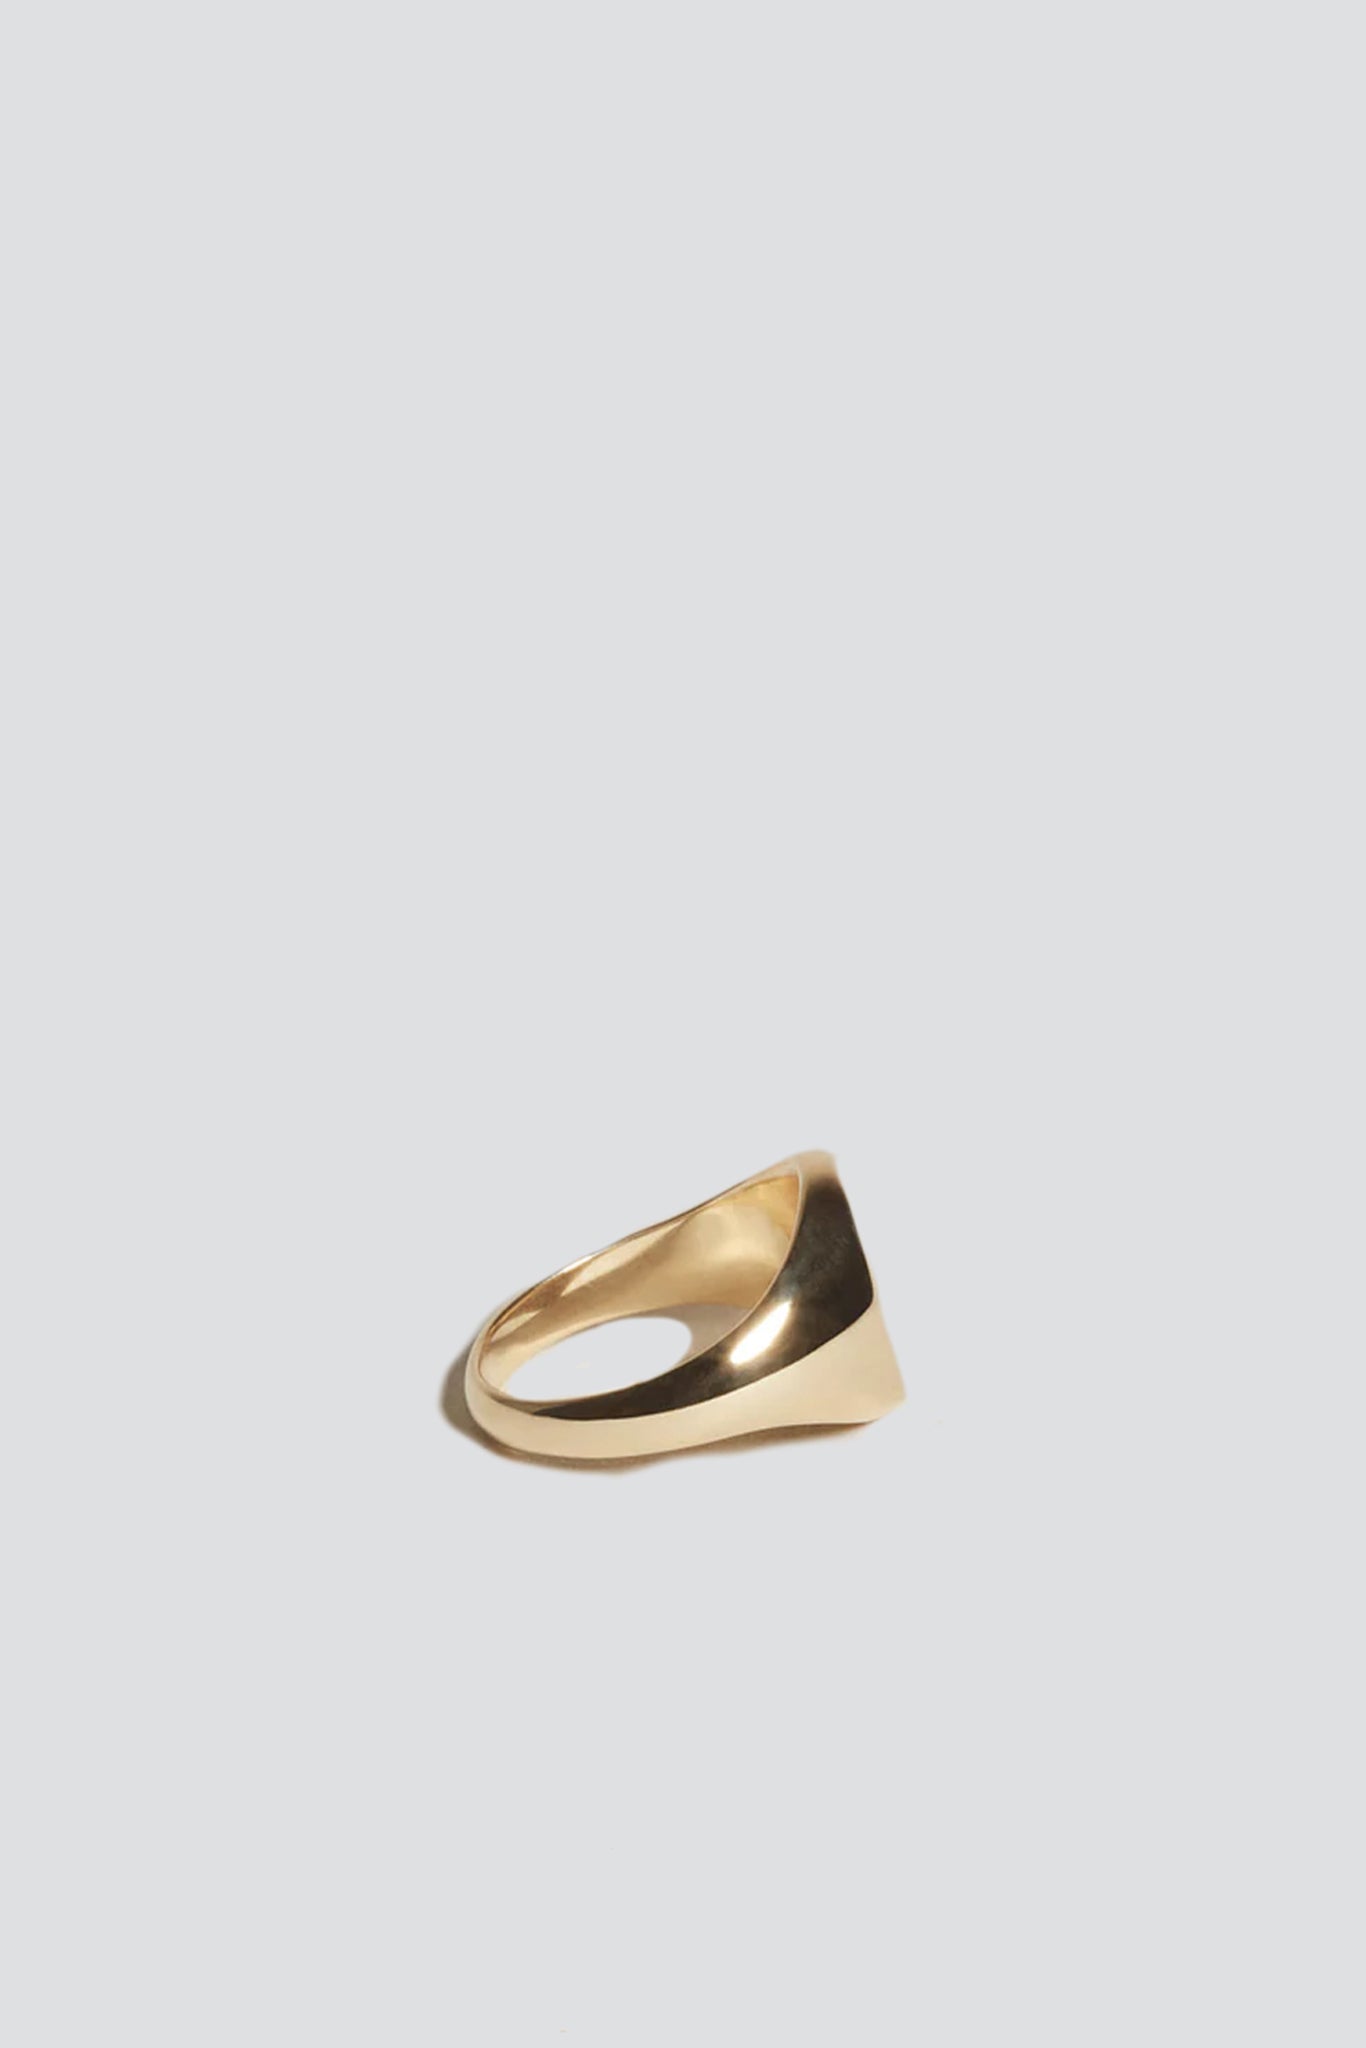 14K Gold Oval Pinky Signet Ring